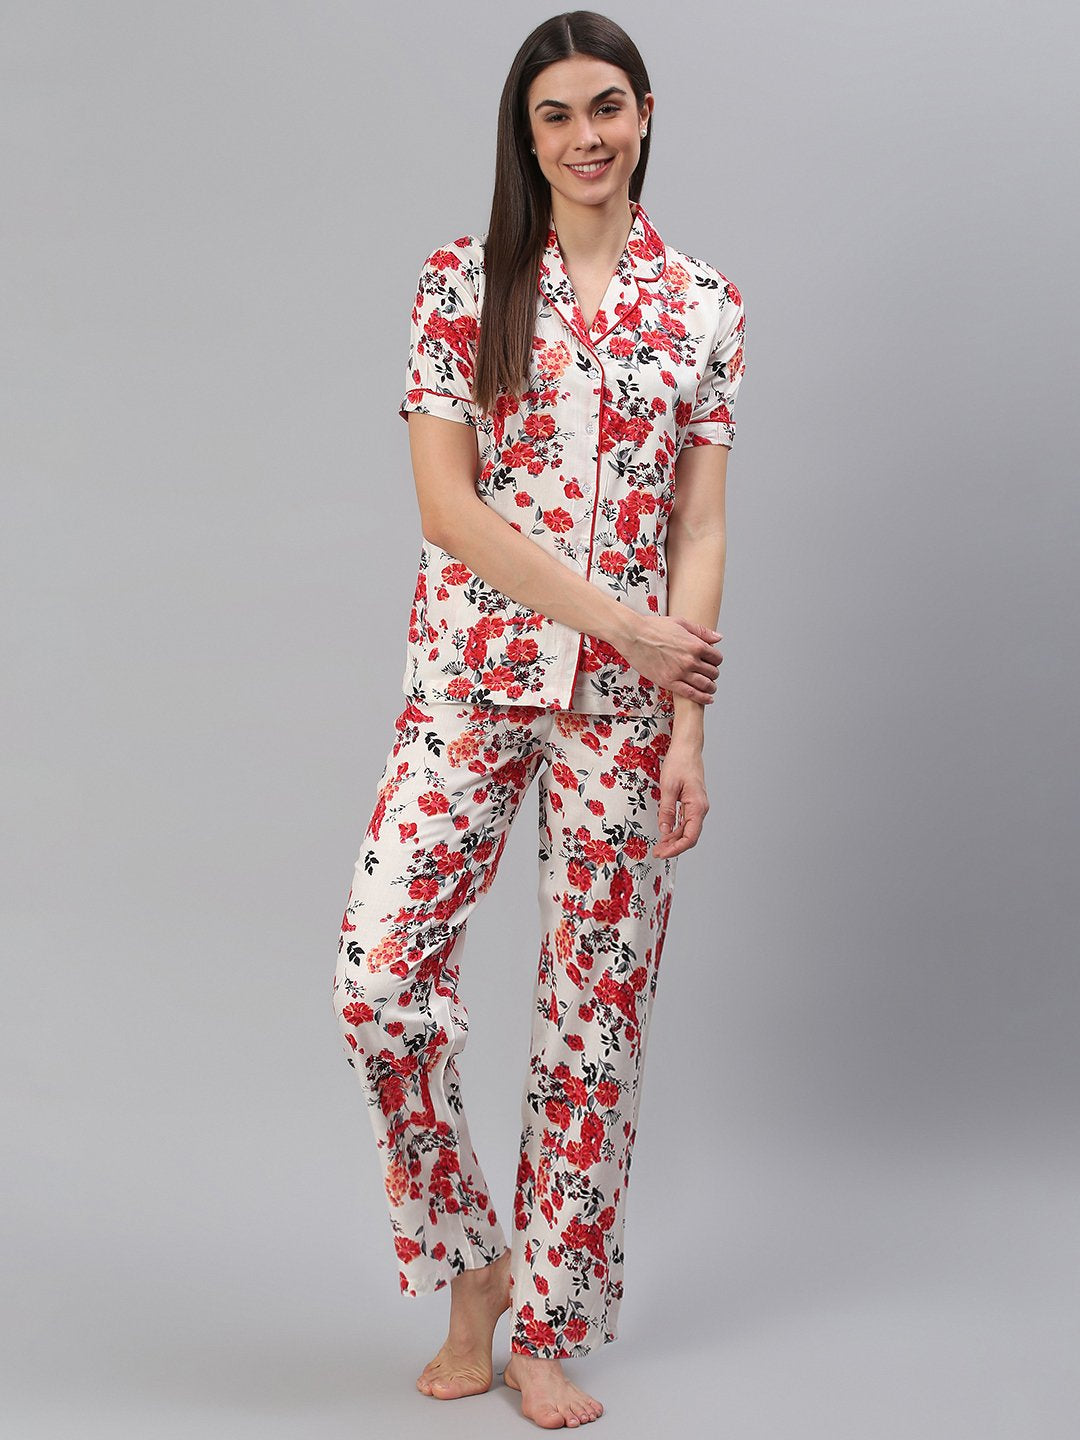 Cation White Floral Night Suit